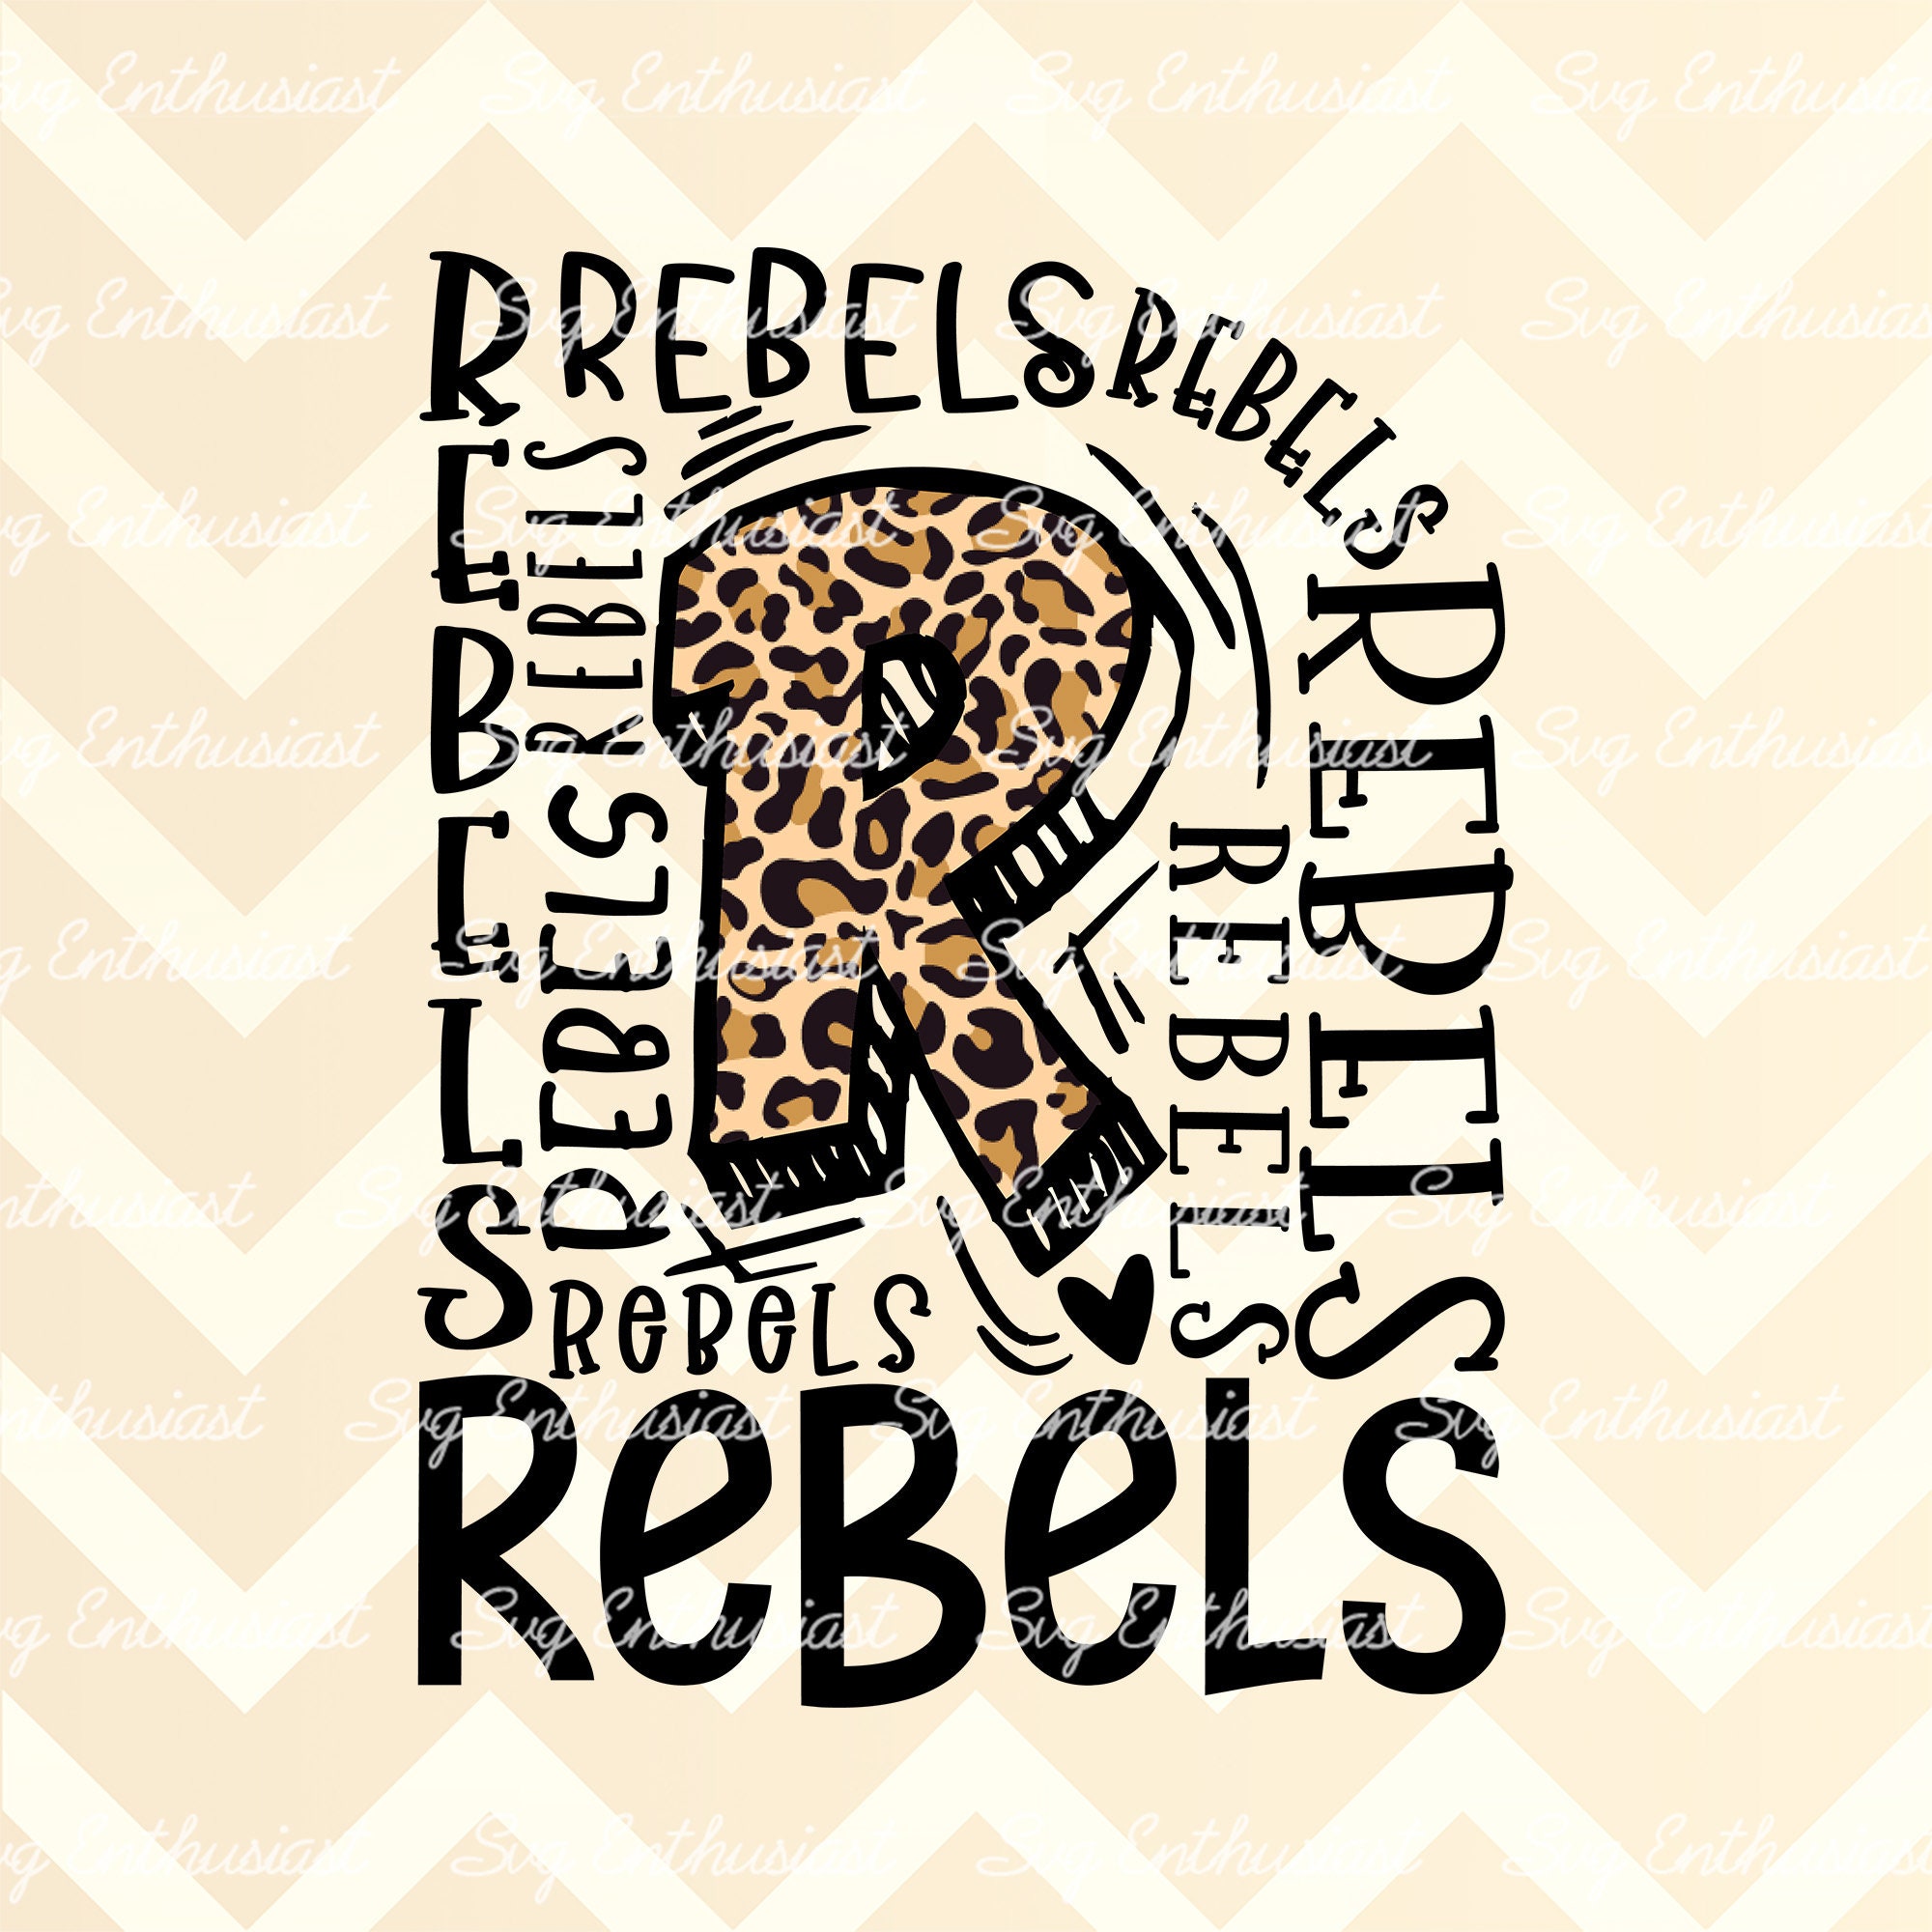 Rebel Art: 10 of the Best Sites for Free Stencils